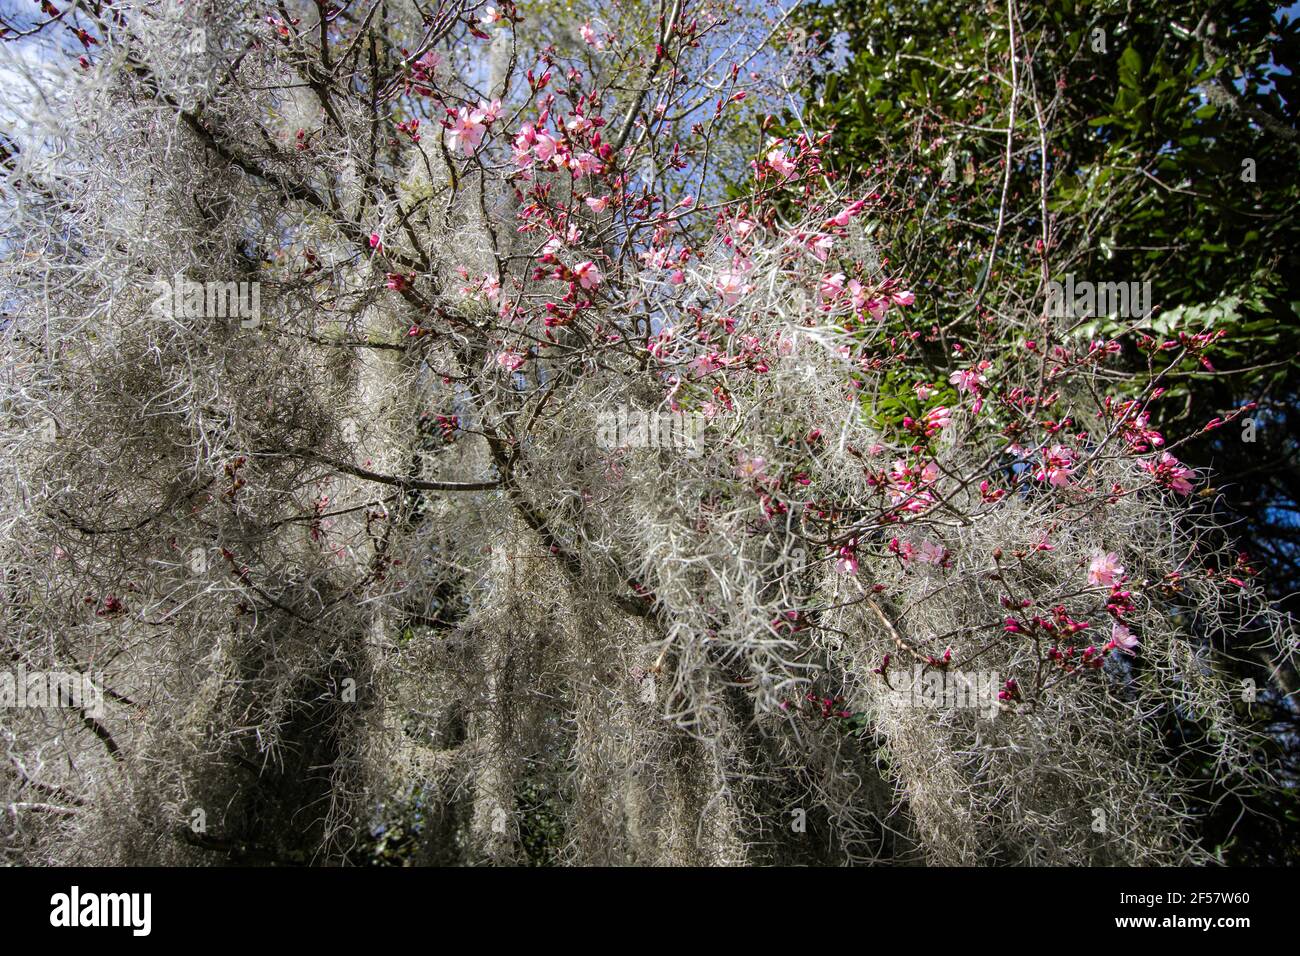 Charleston Magnolia Spring. Beautiful pink magnolia bloom through Spanish moss as the spring season comes to South Carolina in the American South. Stock Photo